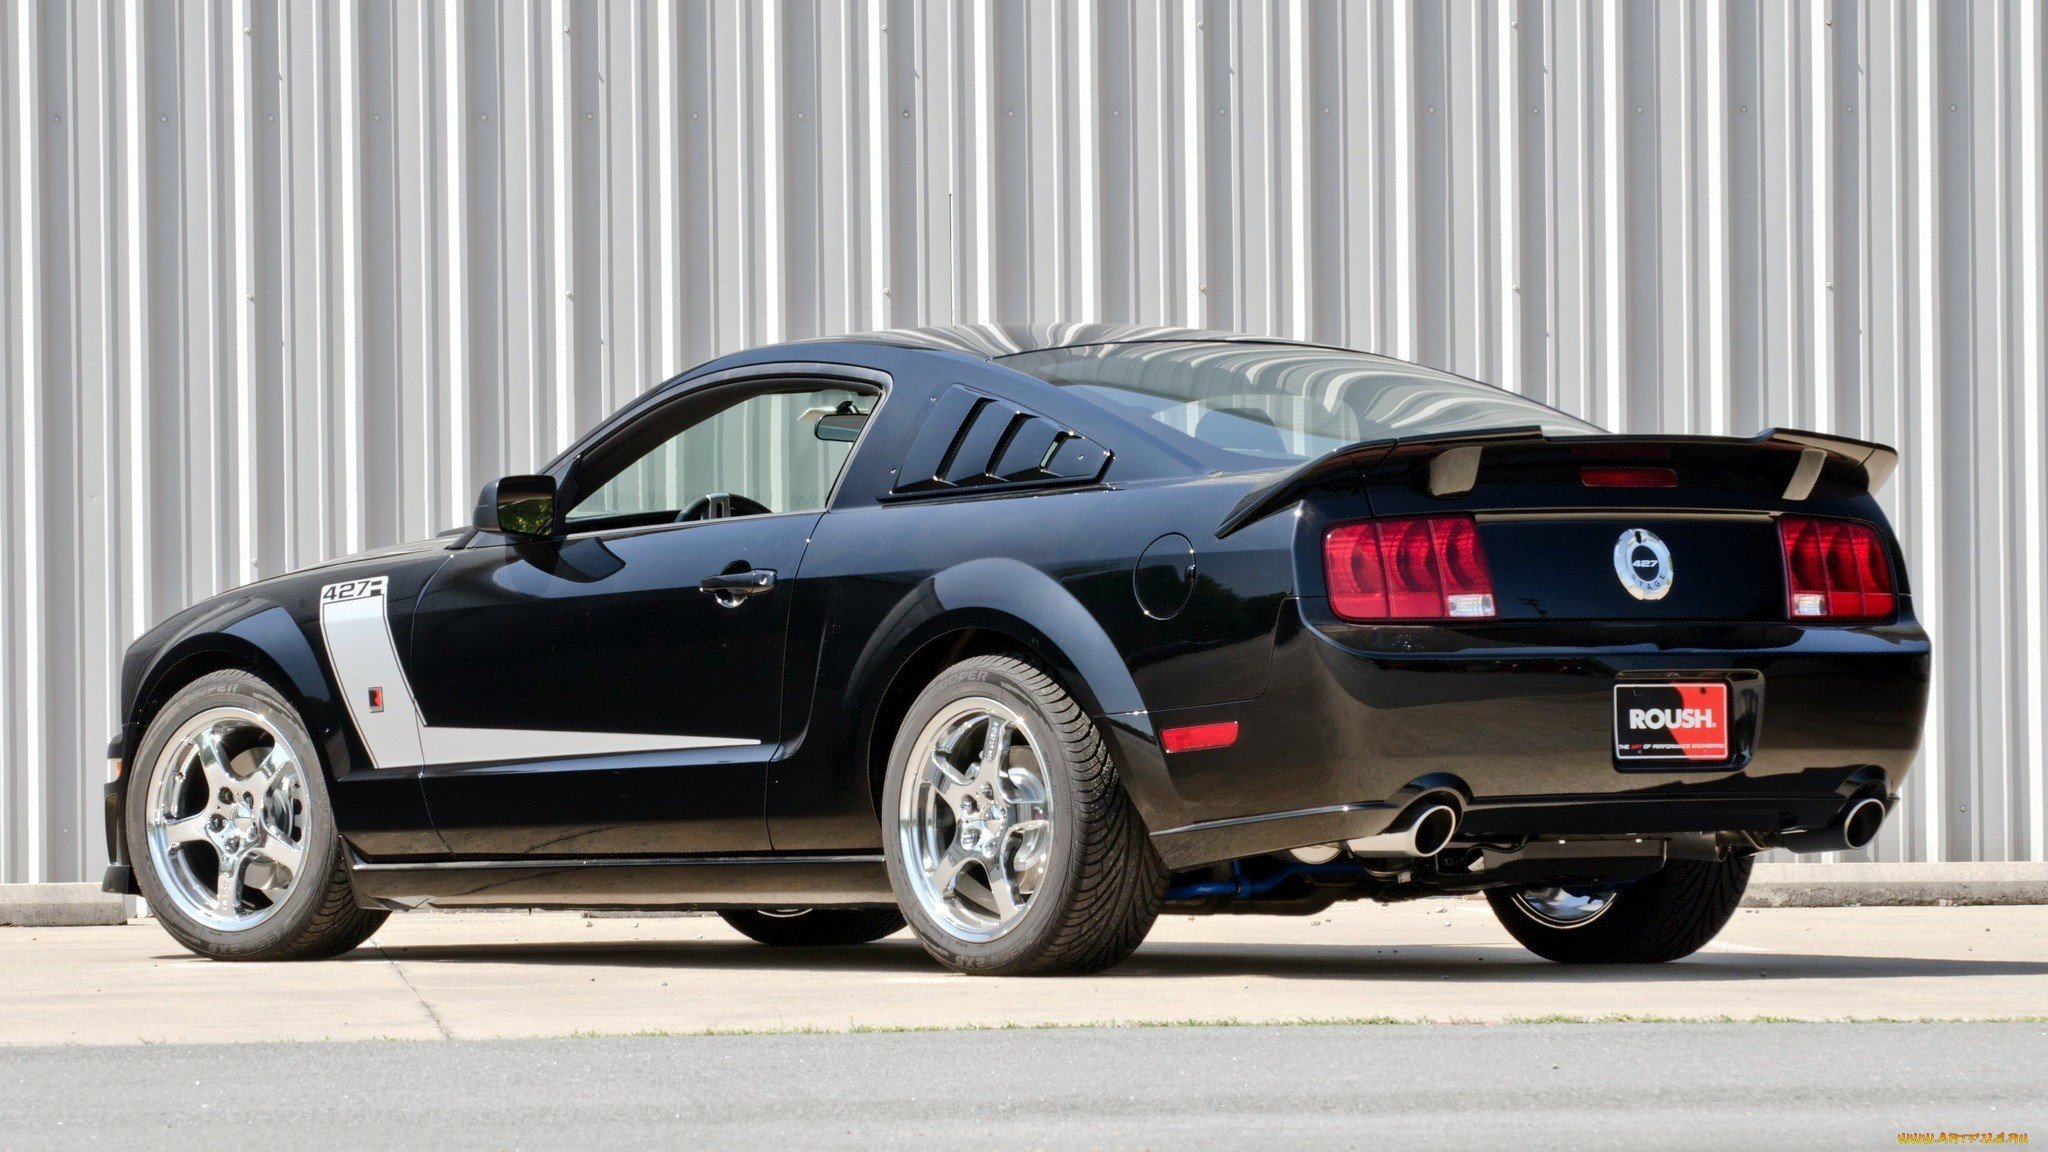 ford, Ford, Mustang, Muscle, Car, Shelby, Gt500, Shelby, Gt, 500, Gt, 500, Supersnake, Mustang, Gt Wallpaper